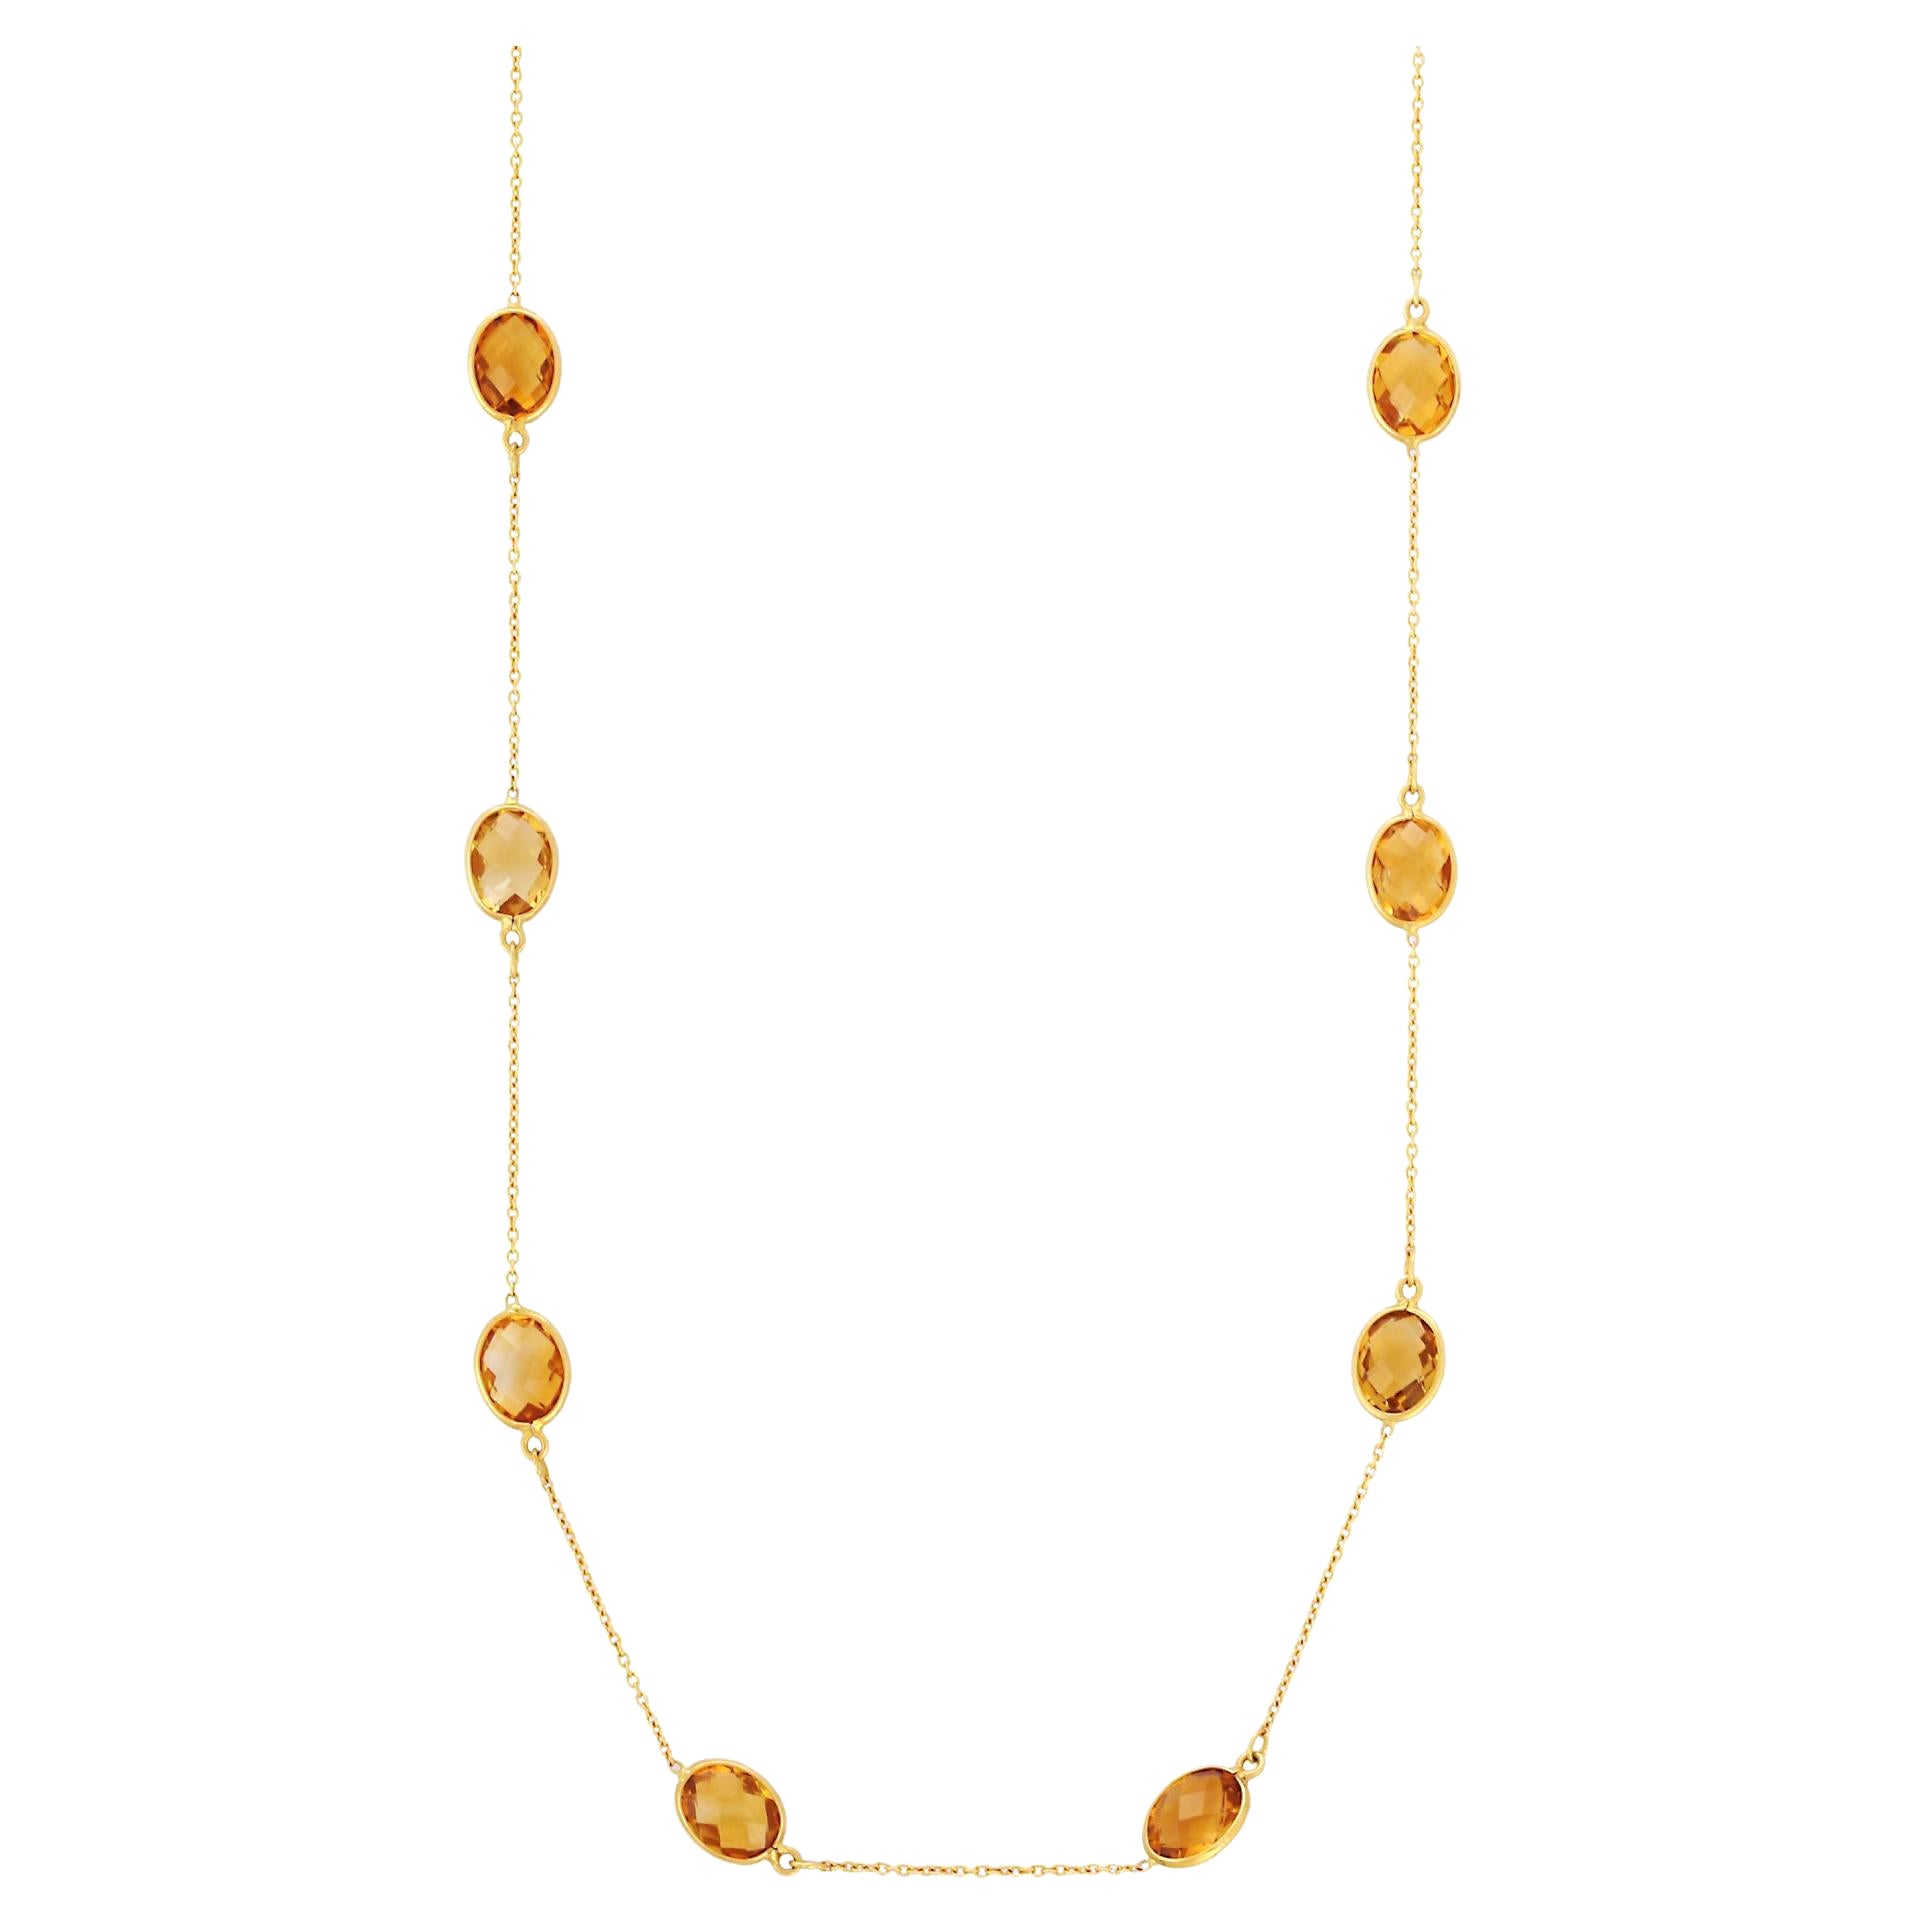 18k Yellow Gold Delicate 17.5 Ct Oval Cut Citrine Chain Necklace For Sale